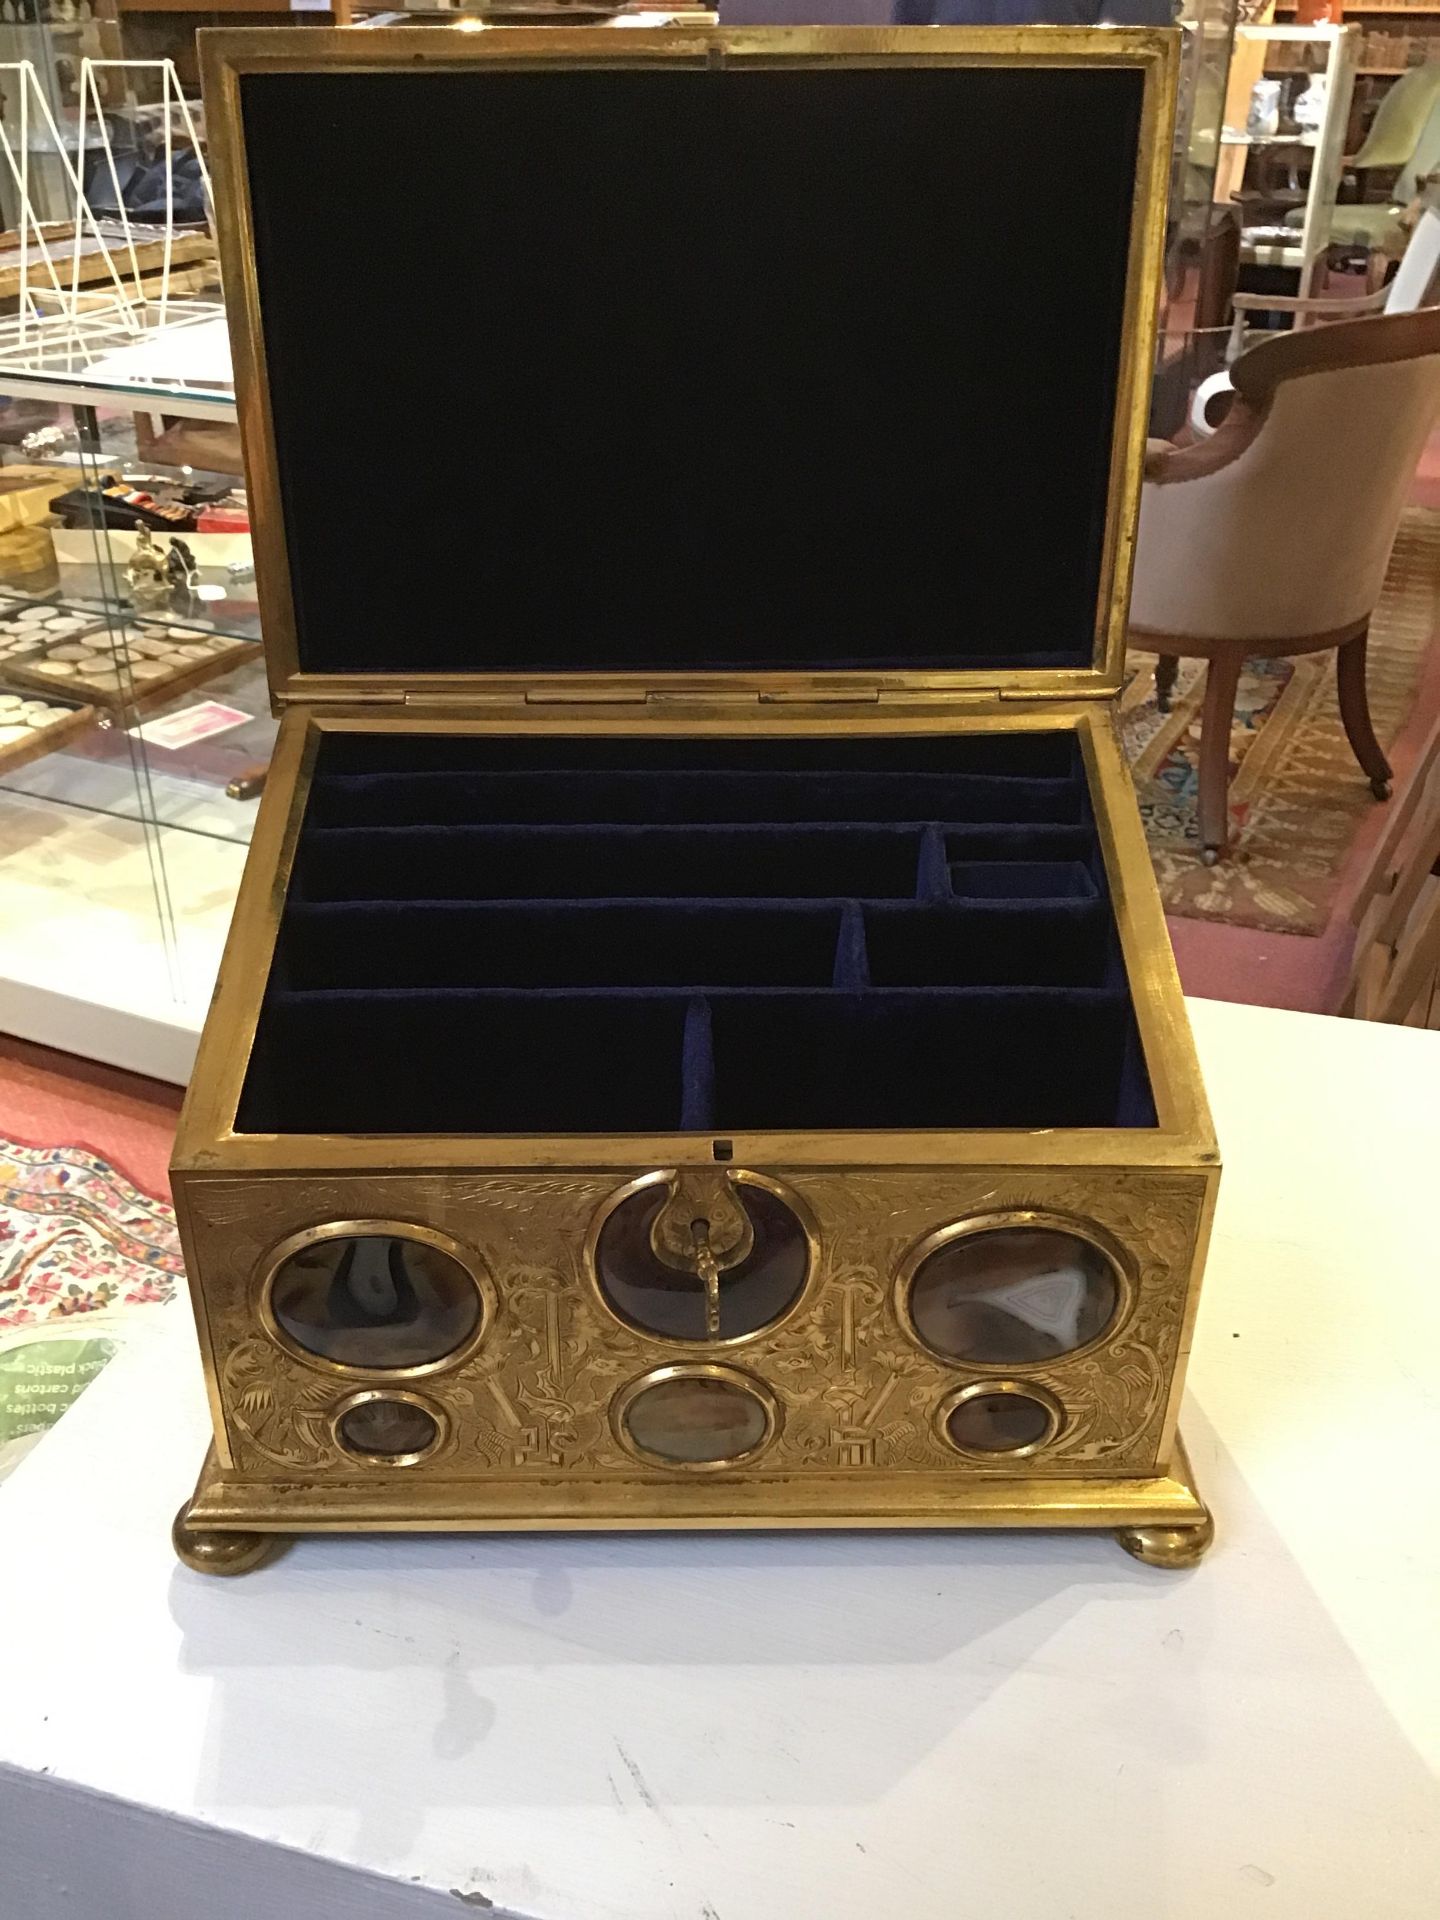 A 19th century correspondence gilt box with engraved decoration and inset cabochon stones hardstones - Bild 8 aus 25